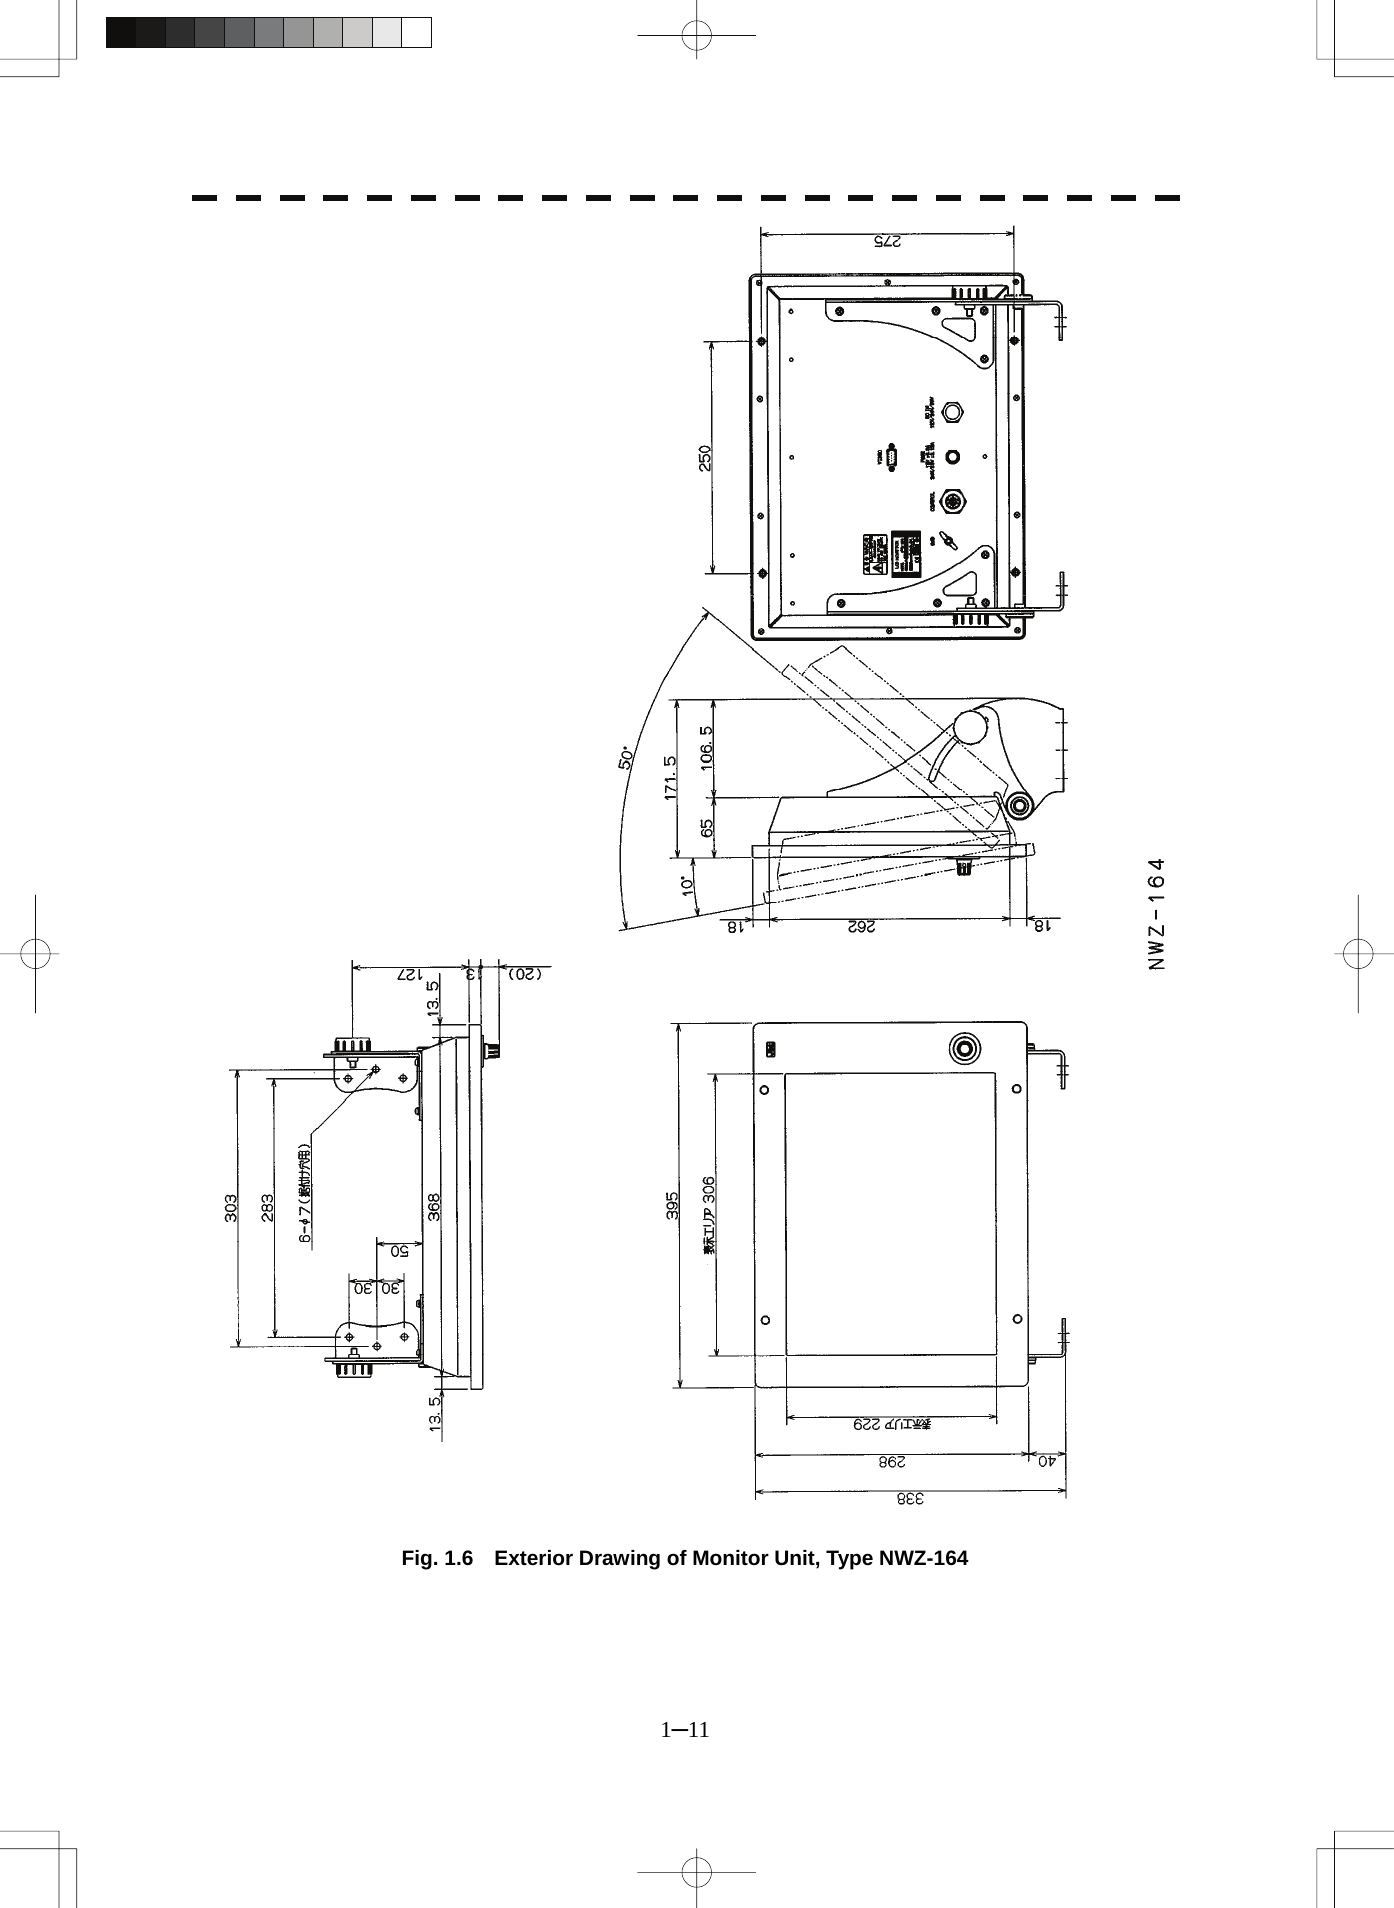  1─11   Fig. 1.6    Exterior Drawing of Monitor Unit, Type NWZ-164  